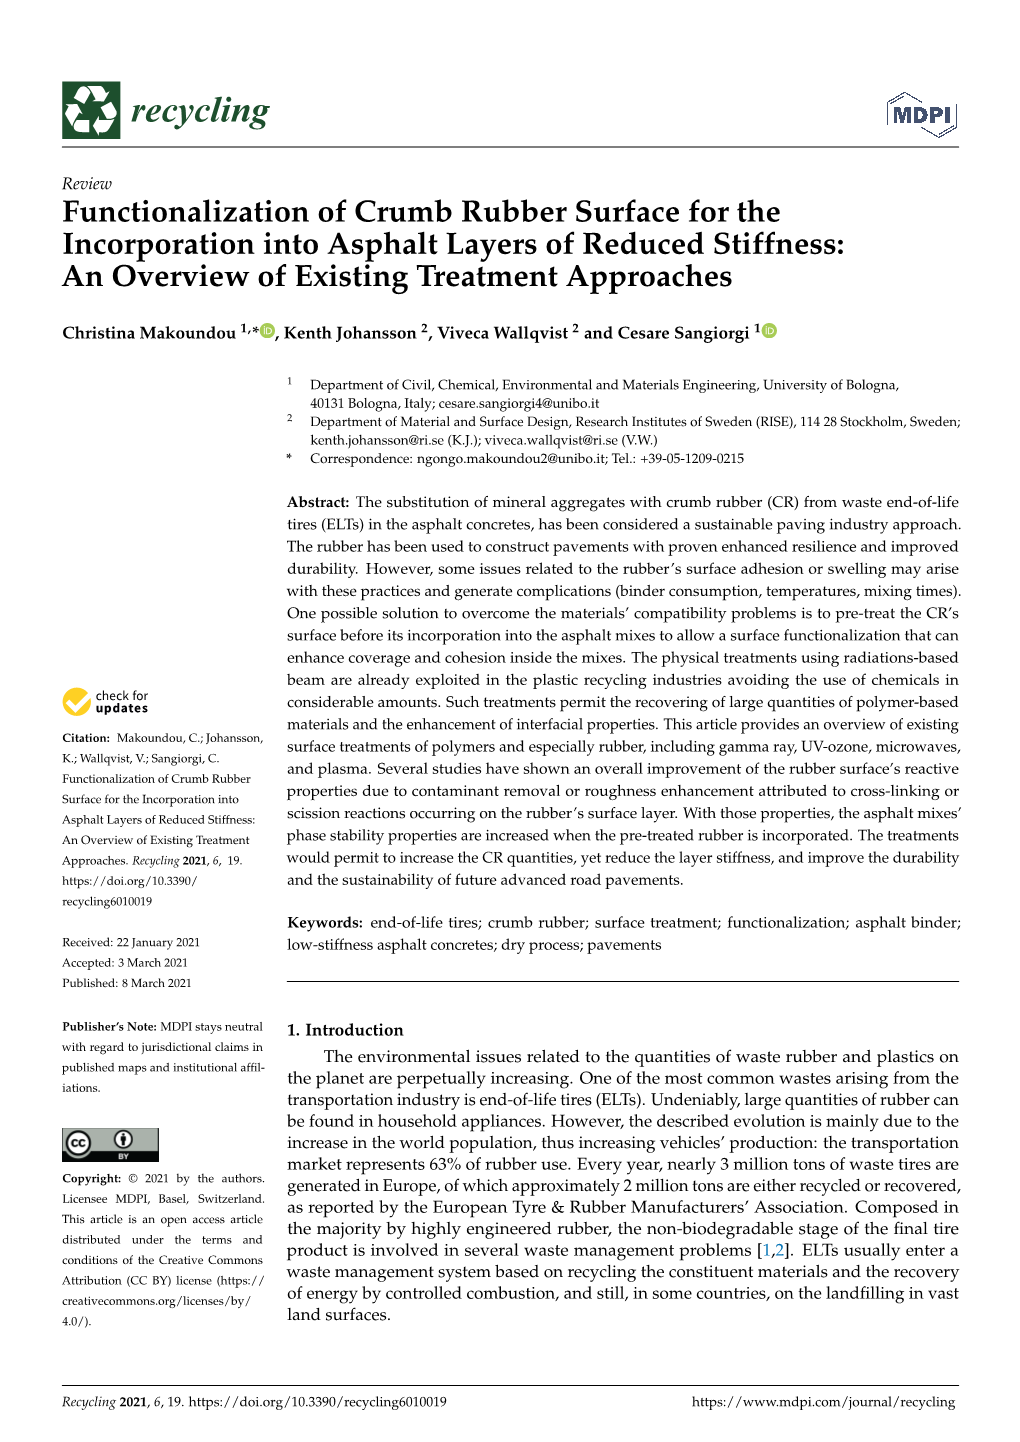 Functionalization of Crumb Rubber Surface for the Incorporation Into Asphalt Layers of Reduced Stiffness: an Overview of Existing Treatment Approaches